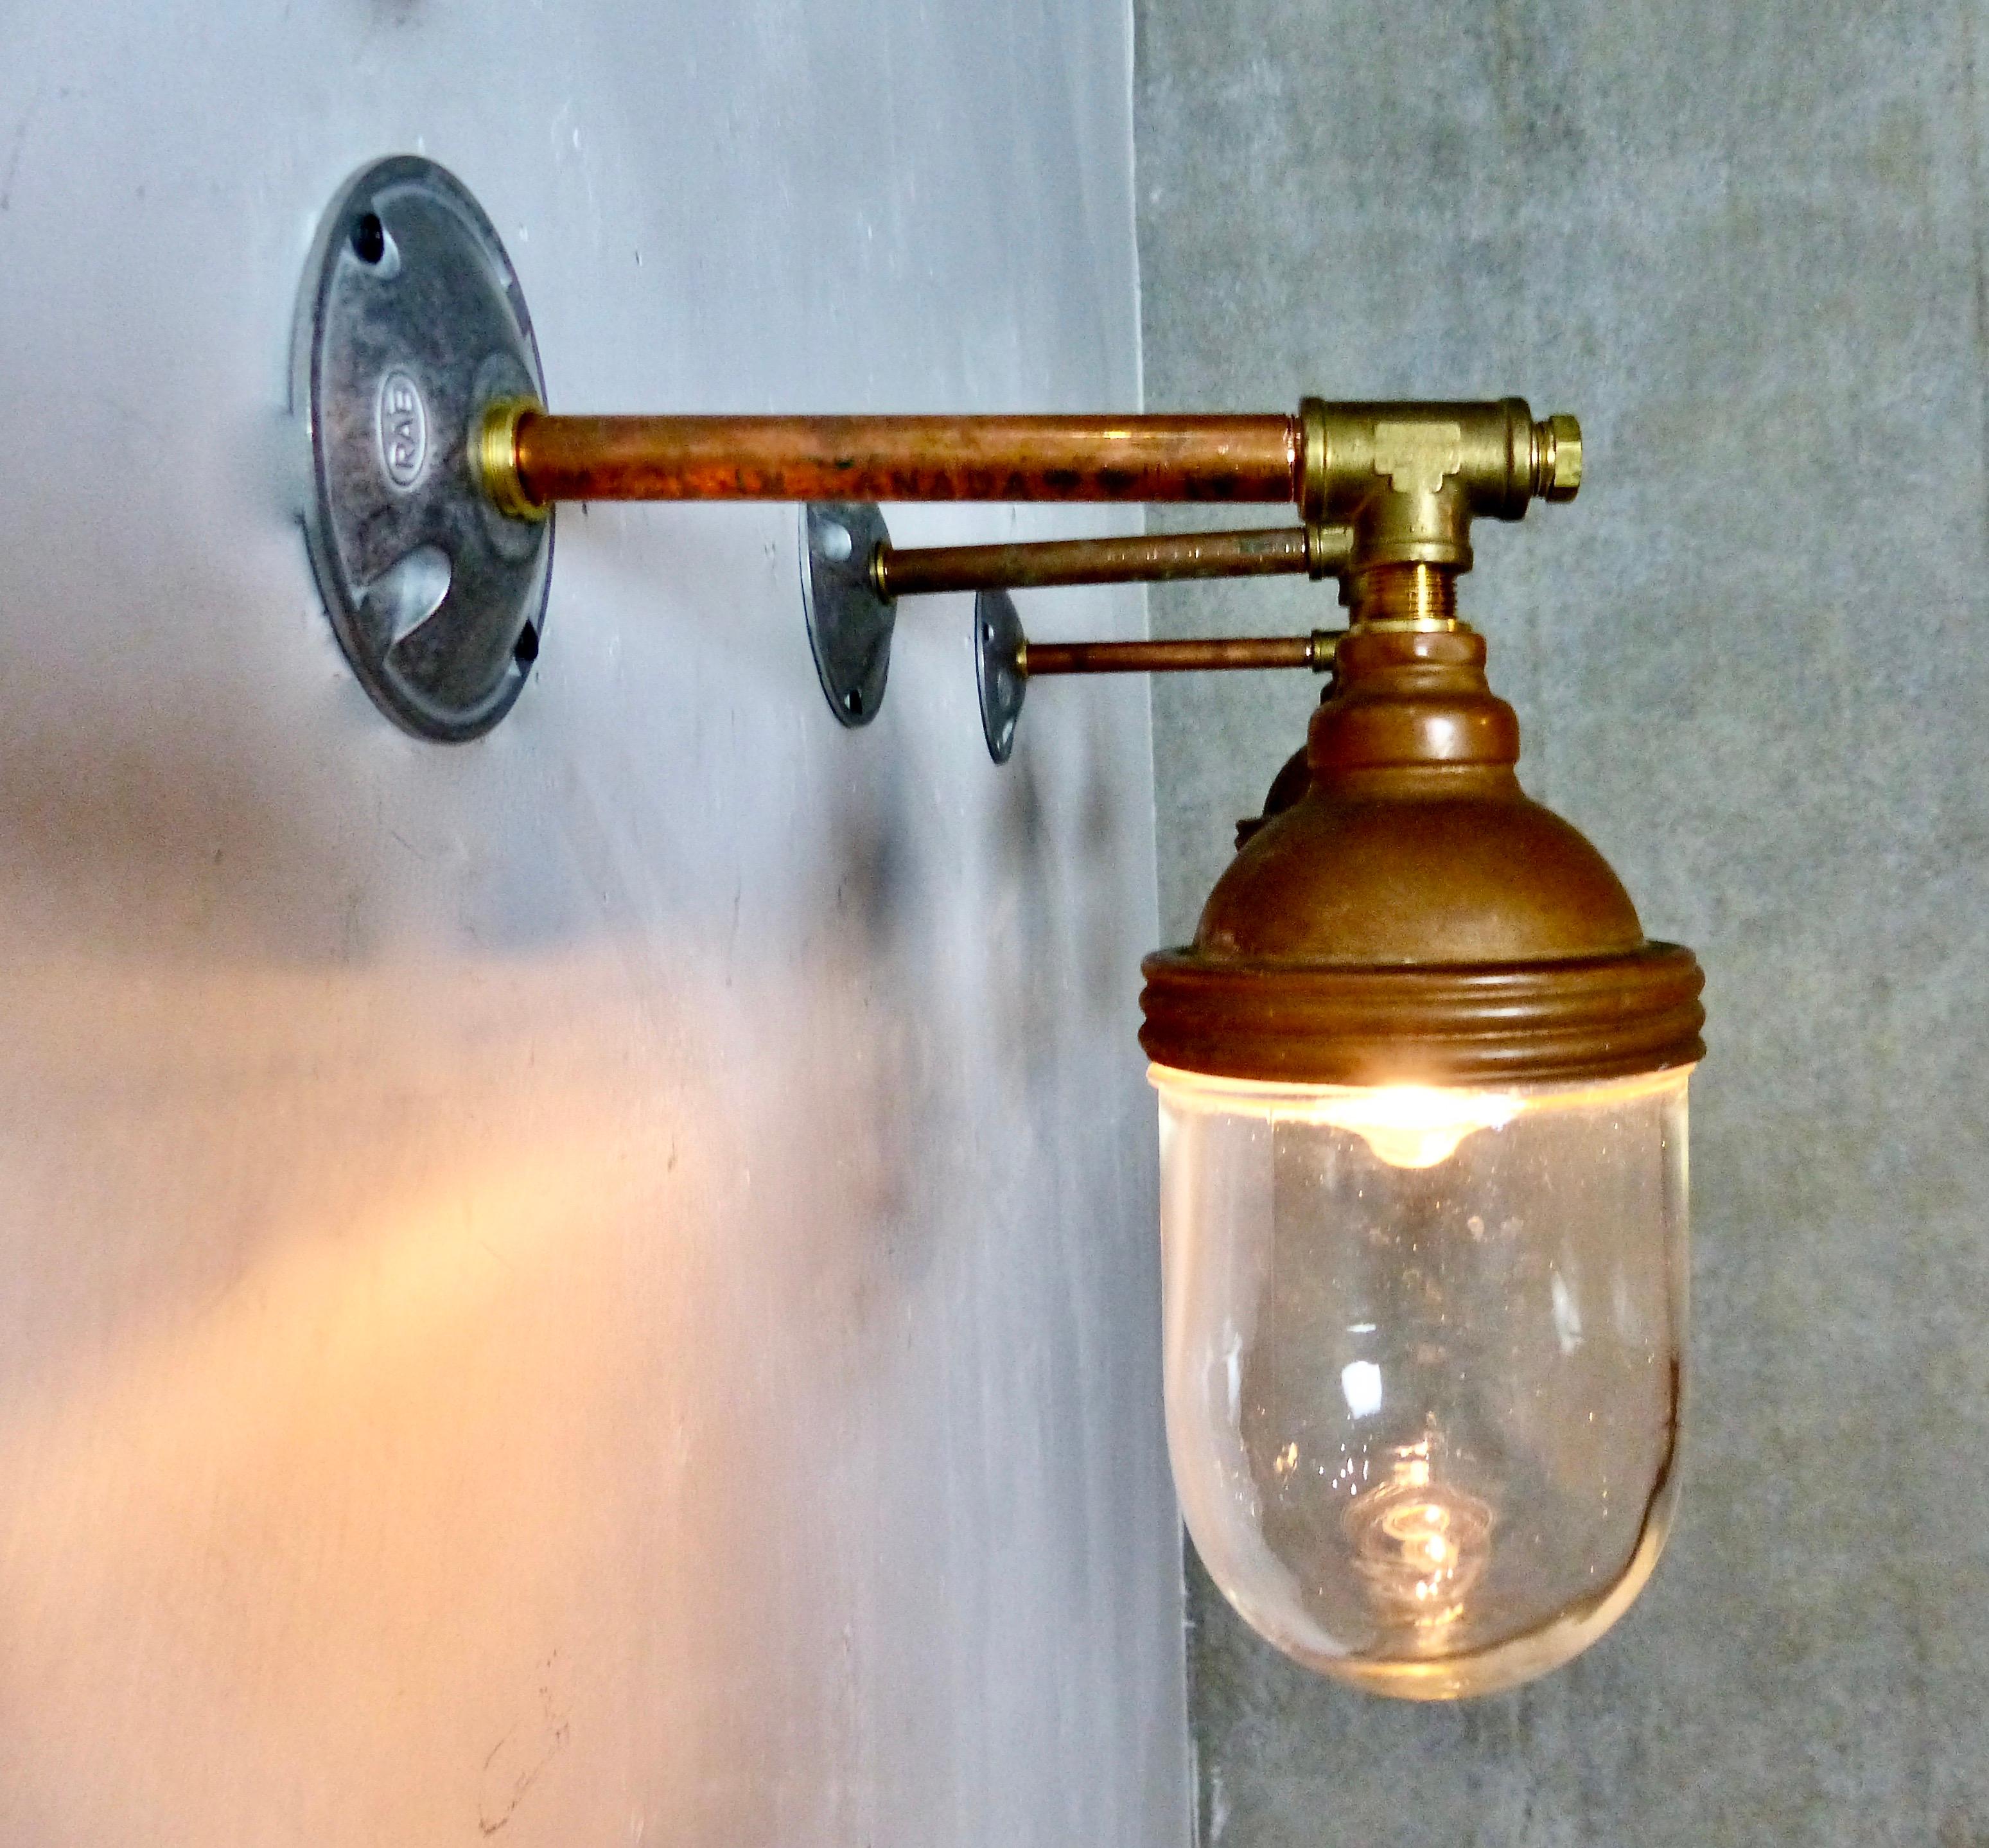 A set of three wall sconces made from Benjamin copper topped lights mounted on copper pipe. A classic industrial look. Wall-mounted lights have been re-wired and inspected and approved to current electrical standards. Price per light.
Dimensions